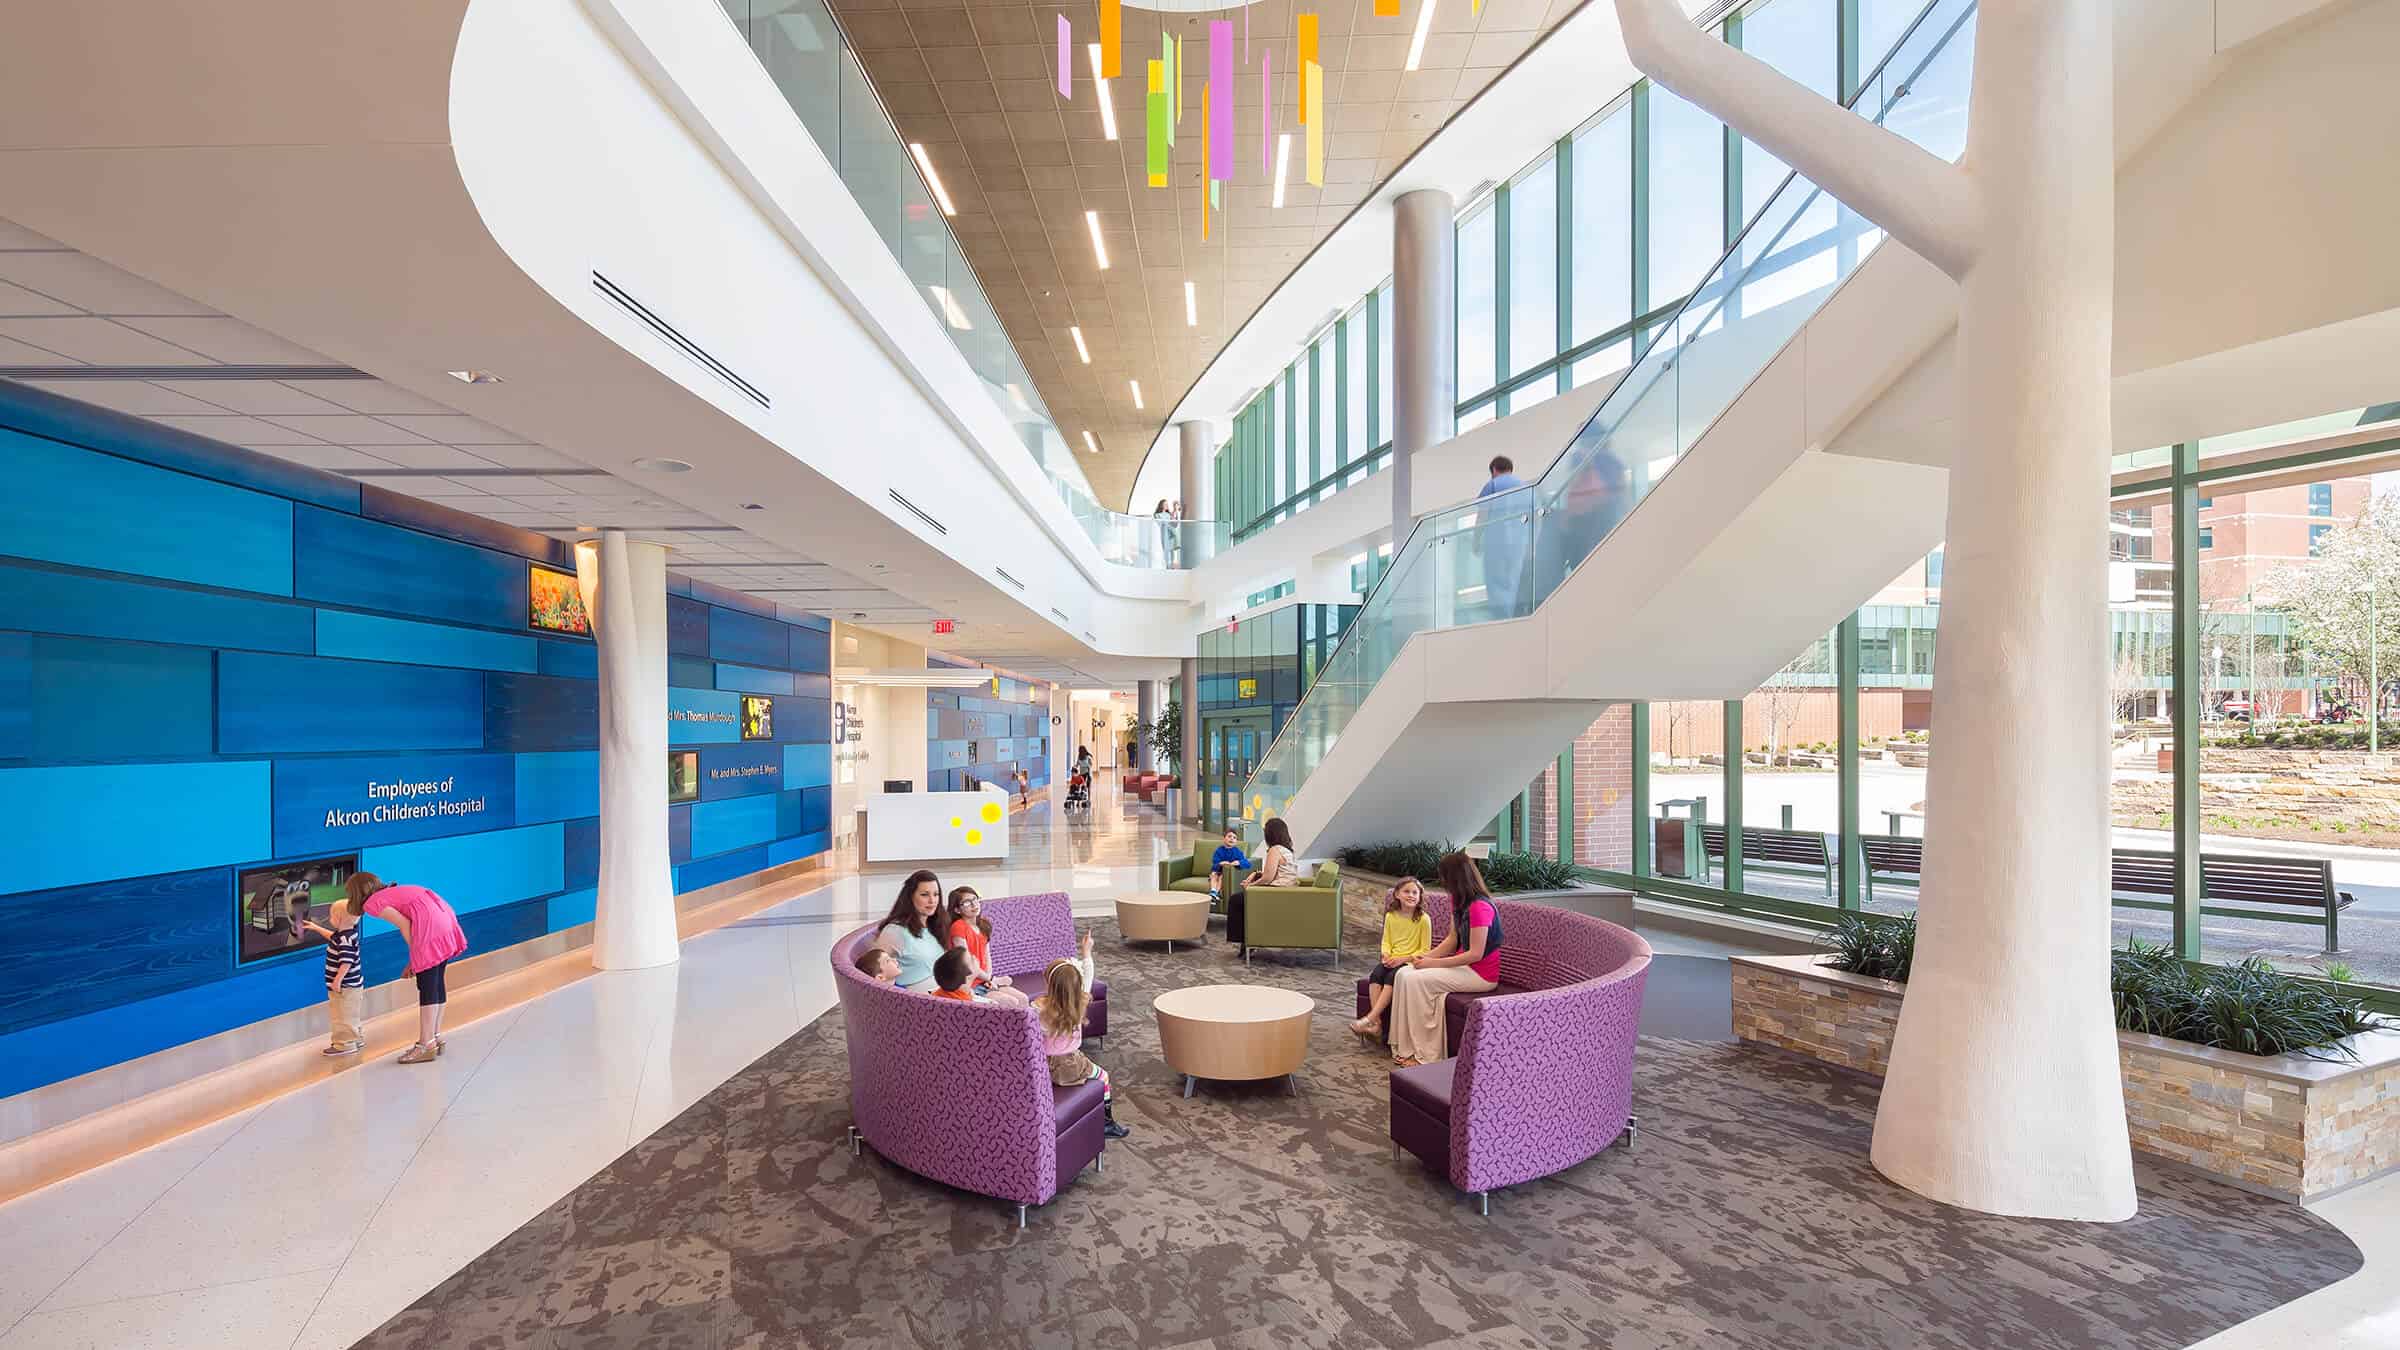 Akron Children's Hospital Lobby, Atrium and Stairwell with Outdoor Views